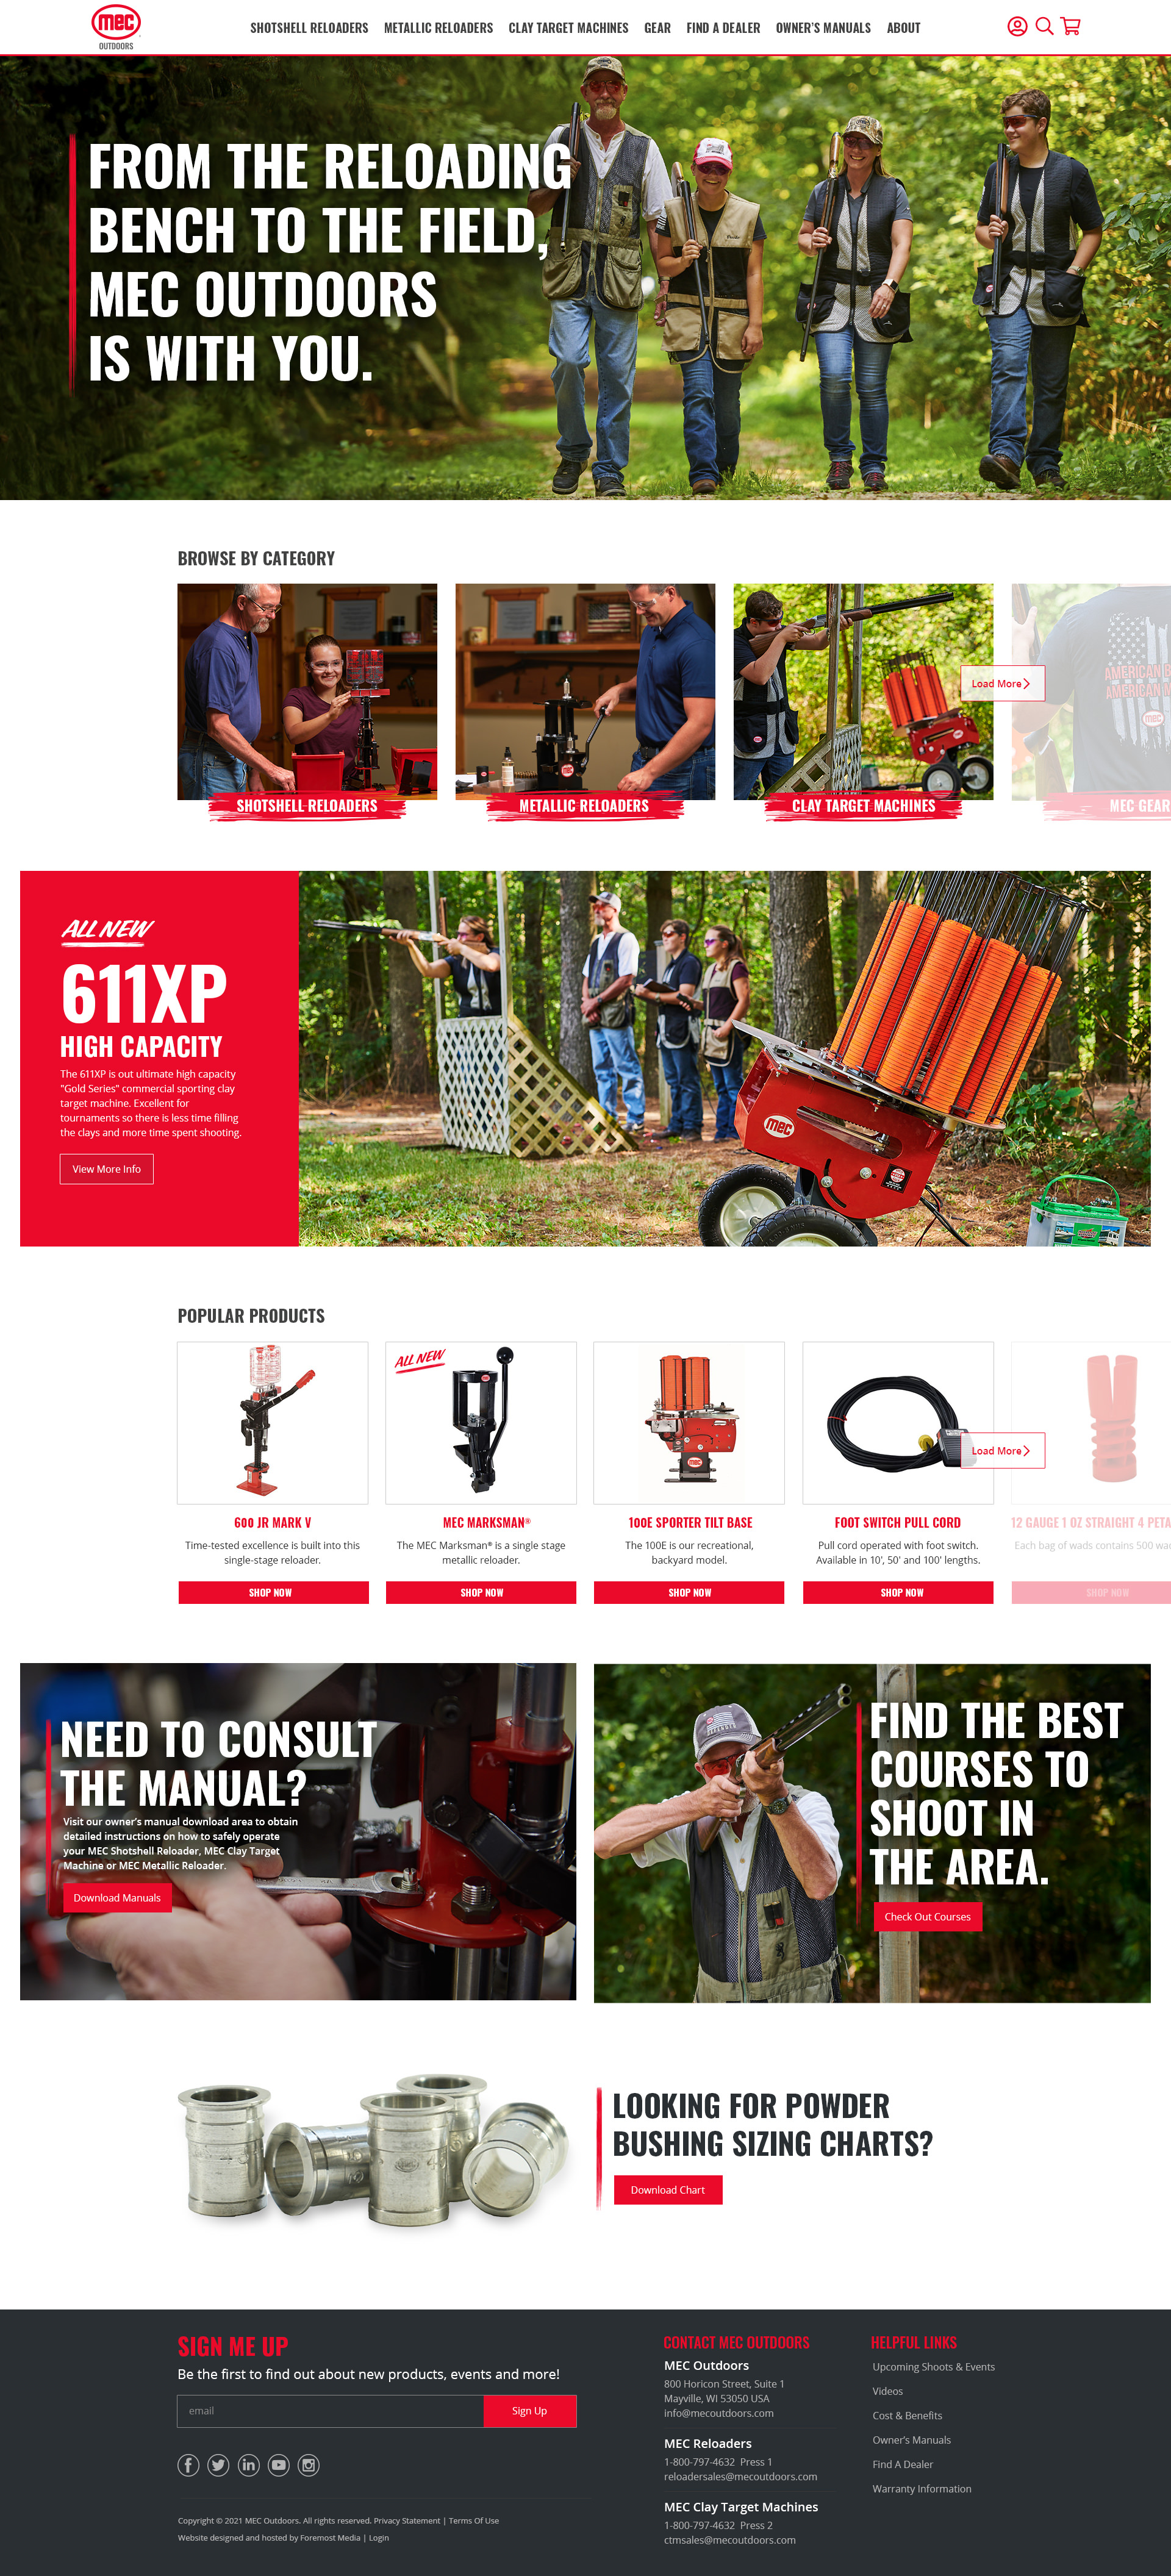 Example of the new and improved nopCommerce website designed by Foremost Media for Mayville Engineering Company Outdoors